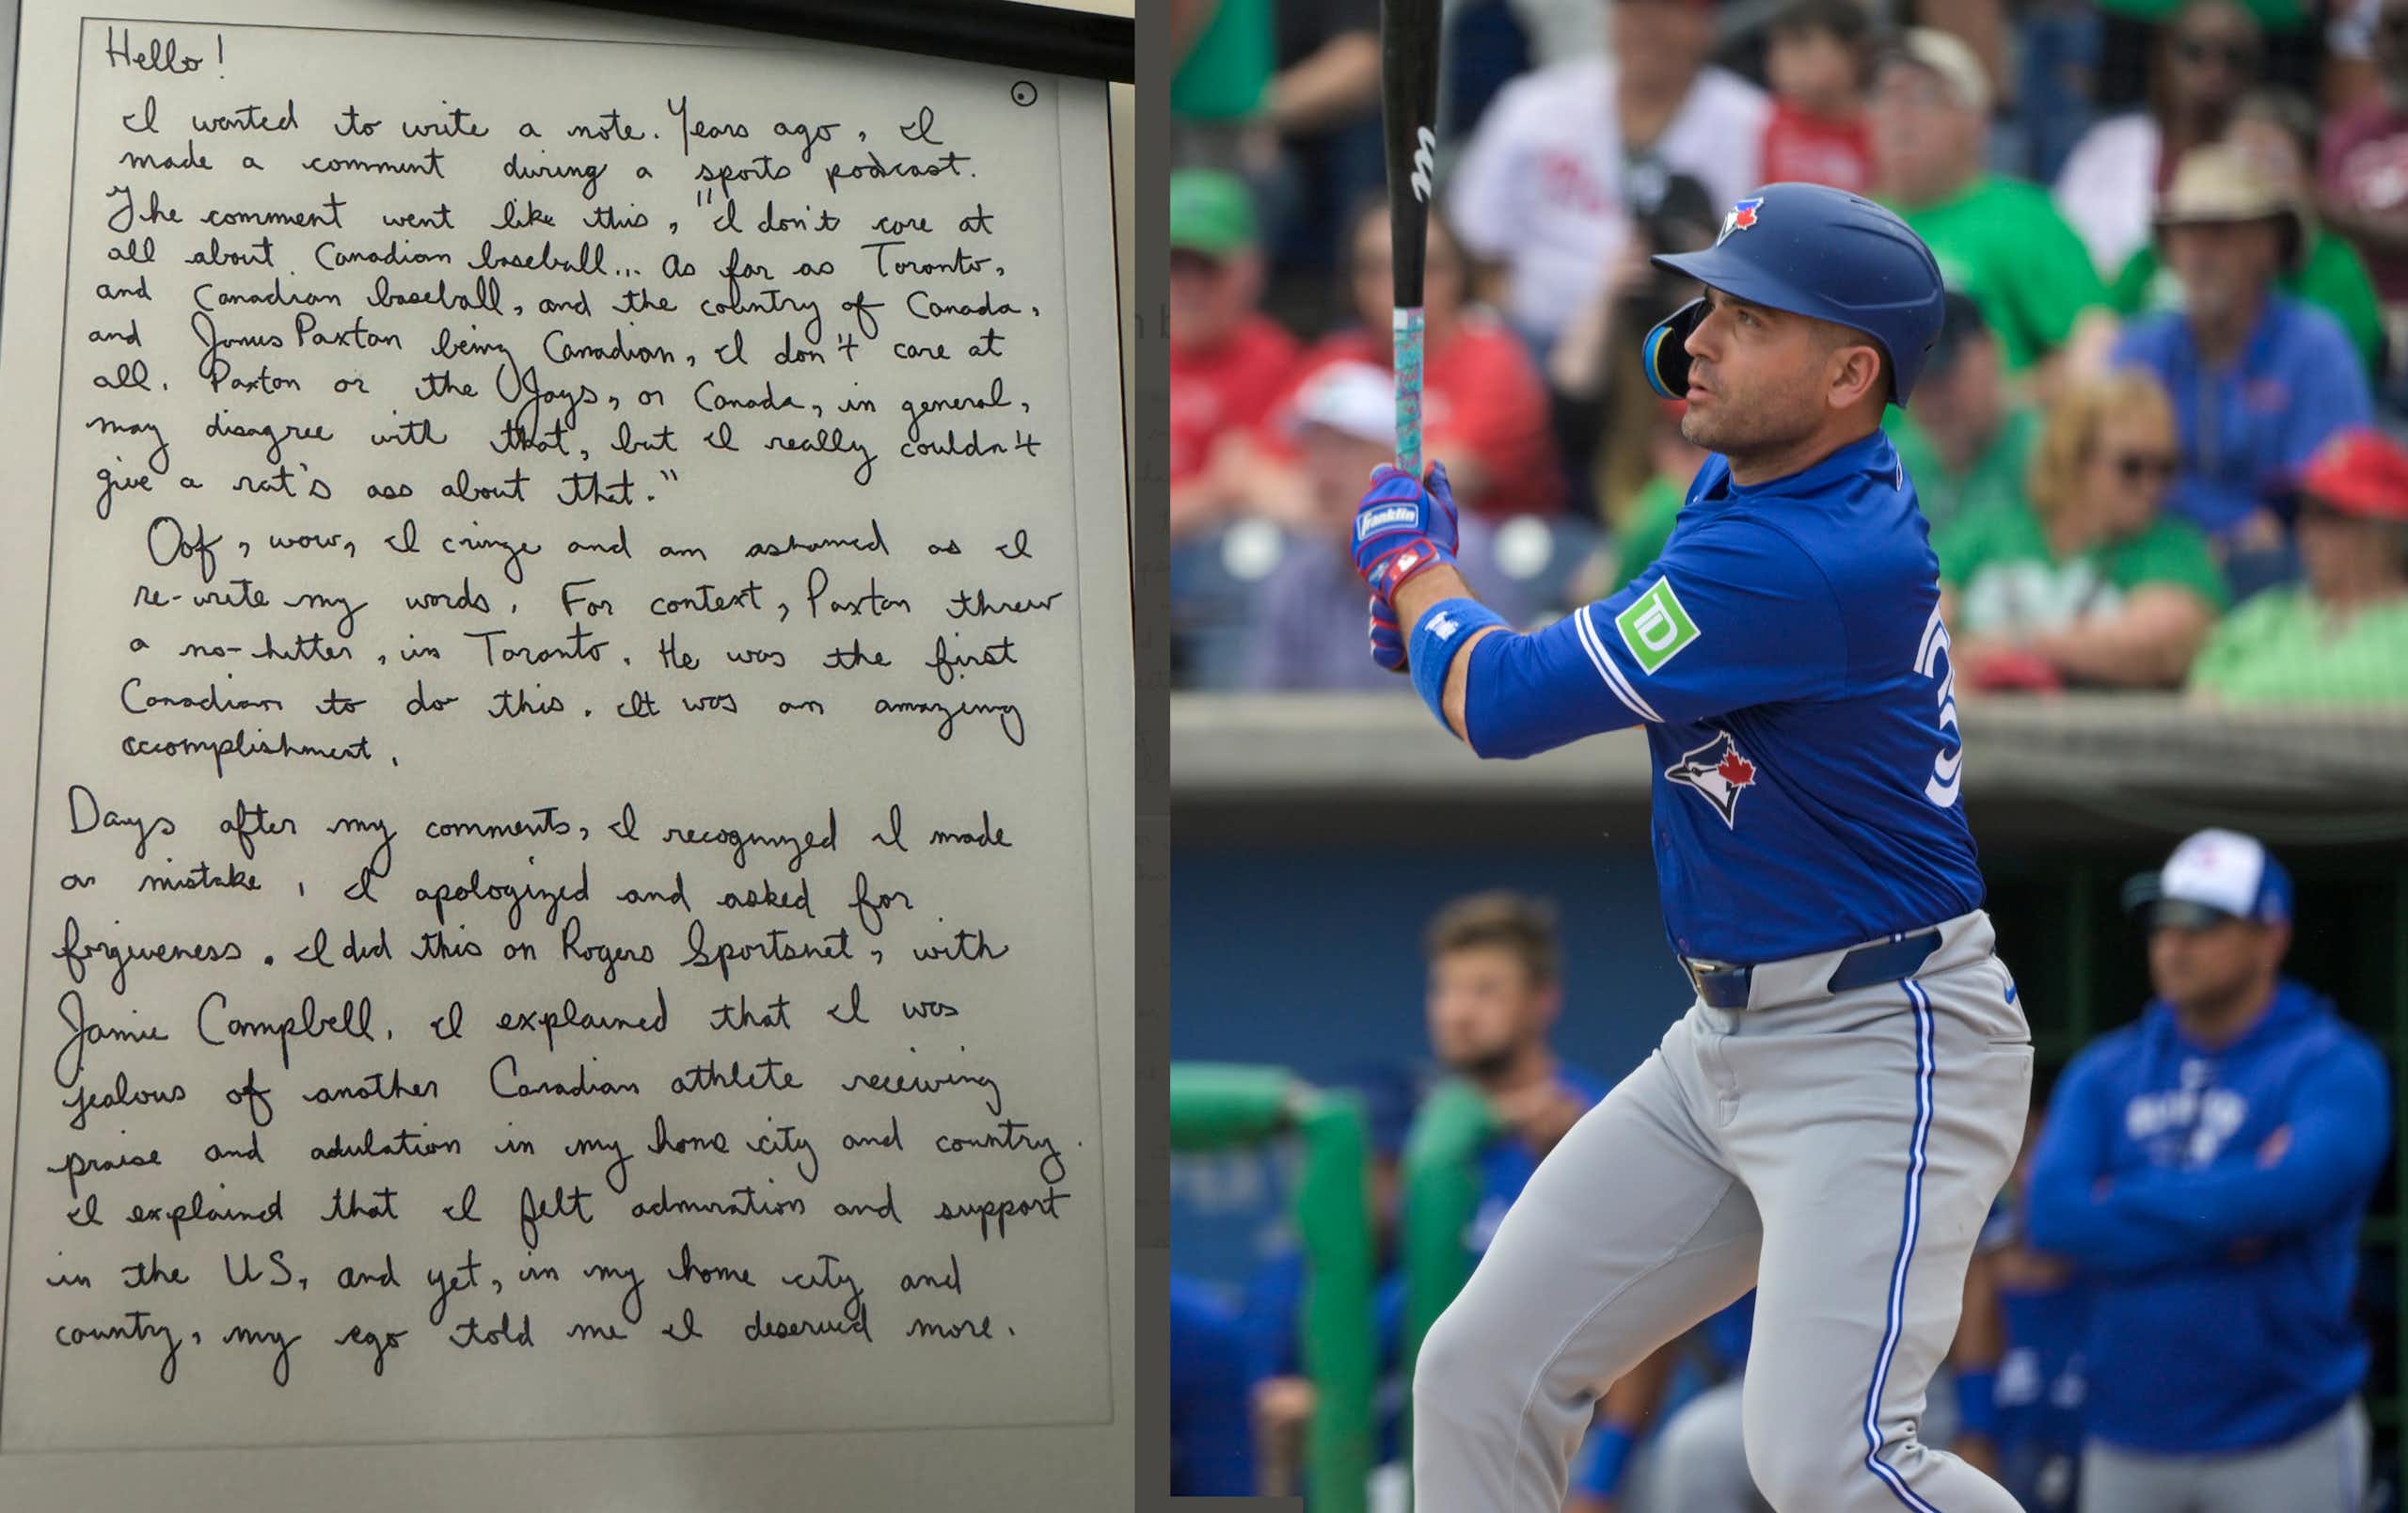 A copy of Joey Votto's letter is superimposed beside a picture of Votto batting in a spring training game.